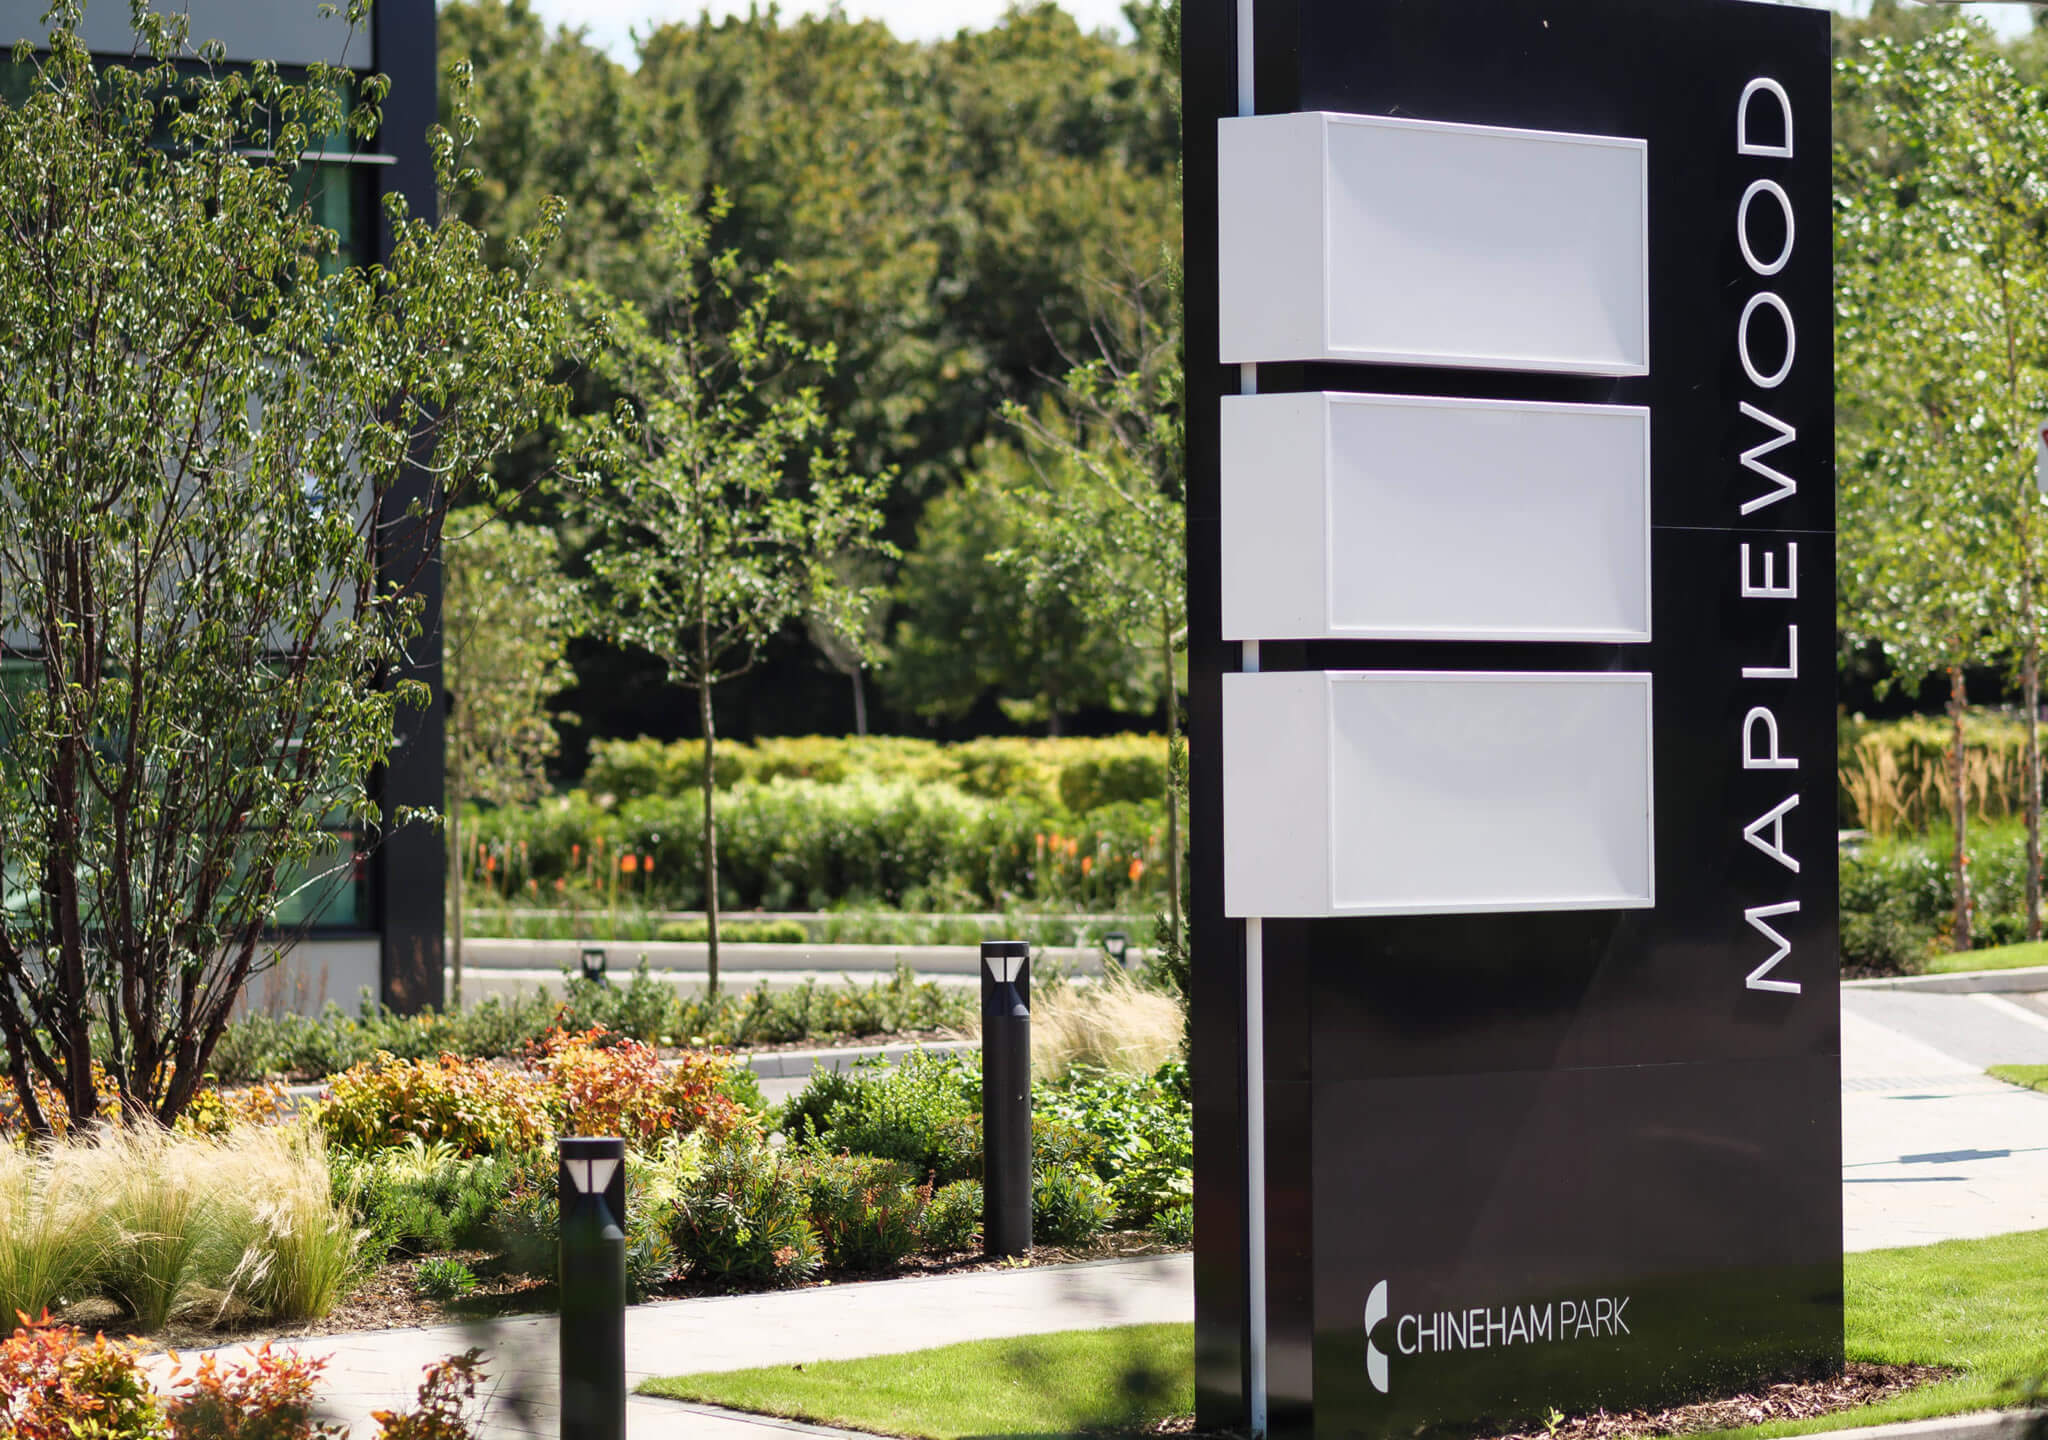 Planting and Wayfinding at Maplewood Chineham Park article